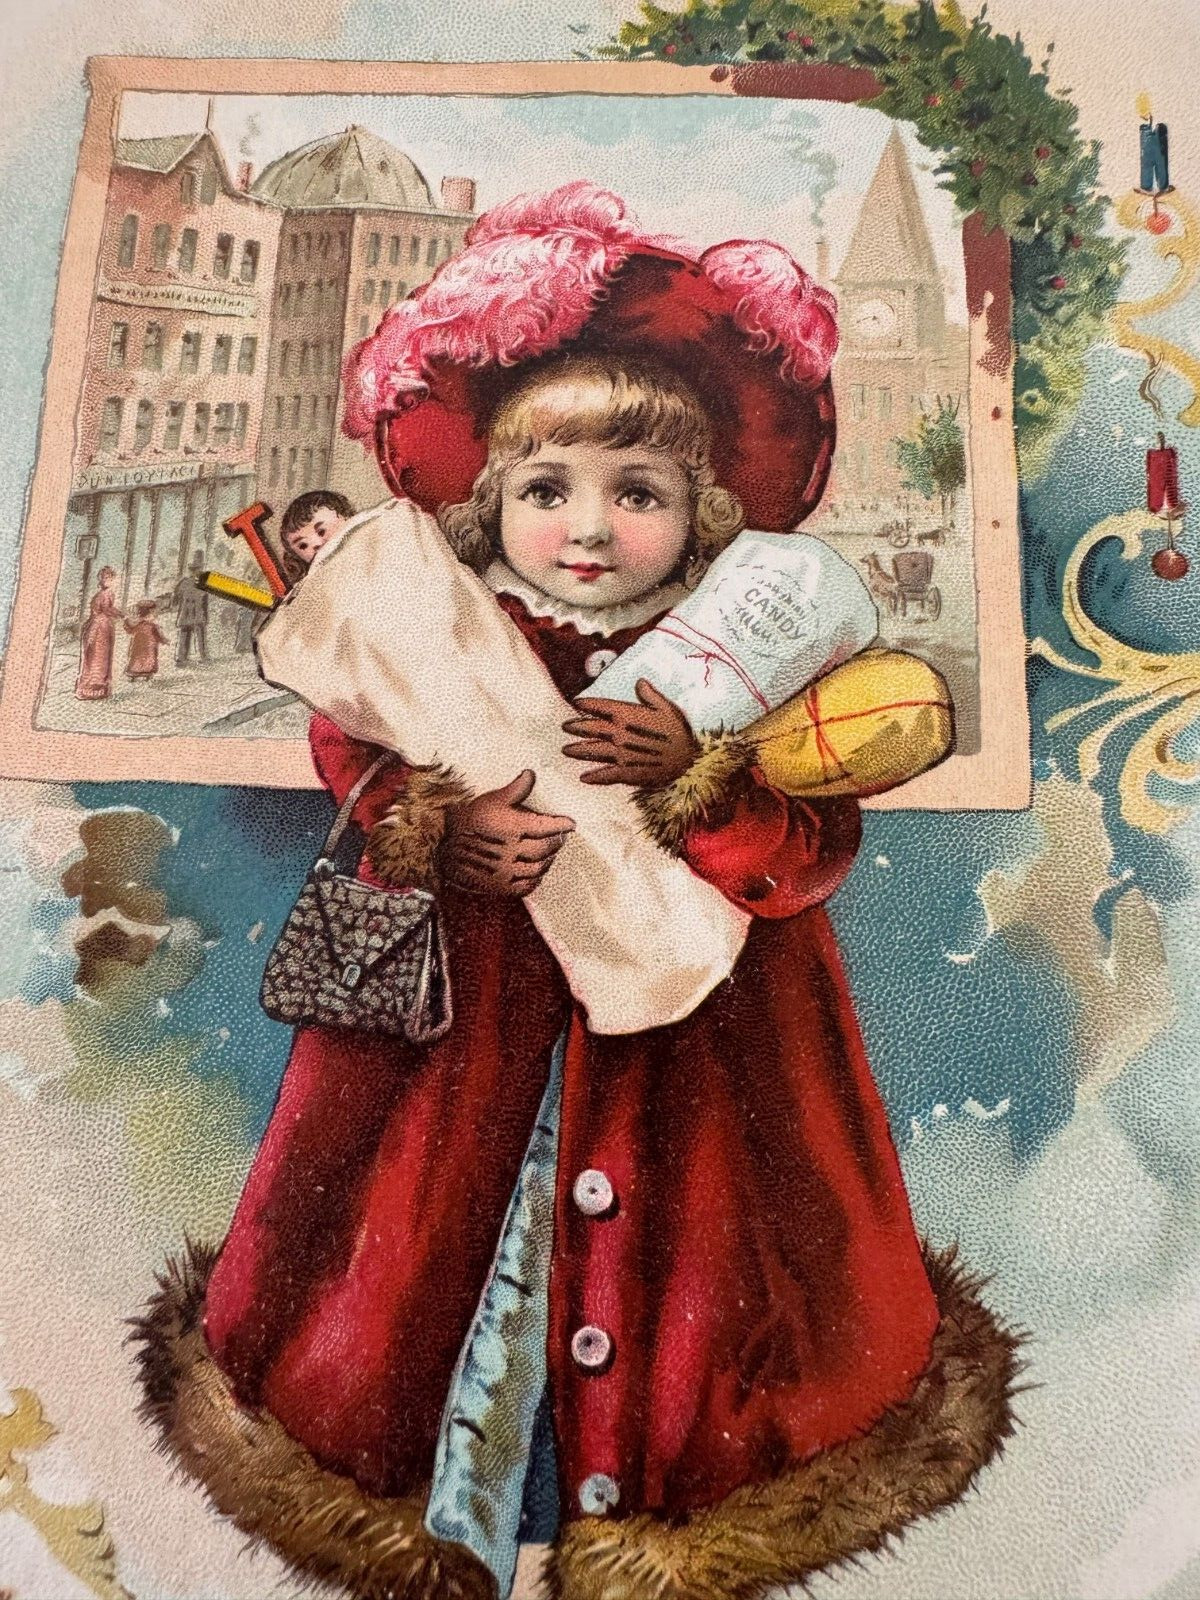 1890s Christmas Shopping Lion Coffee Woolson Spice Co. Sweet Girl w Toys Gifts